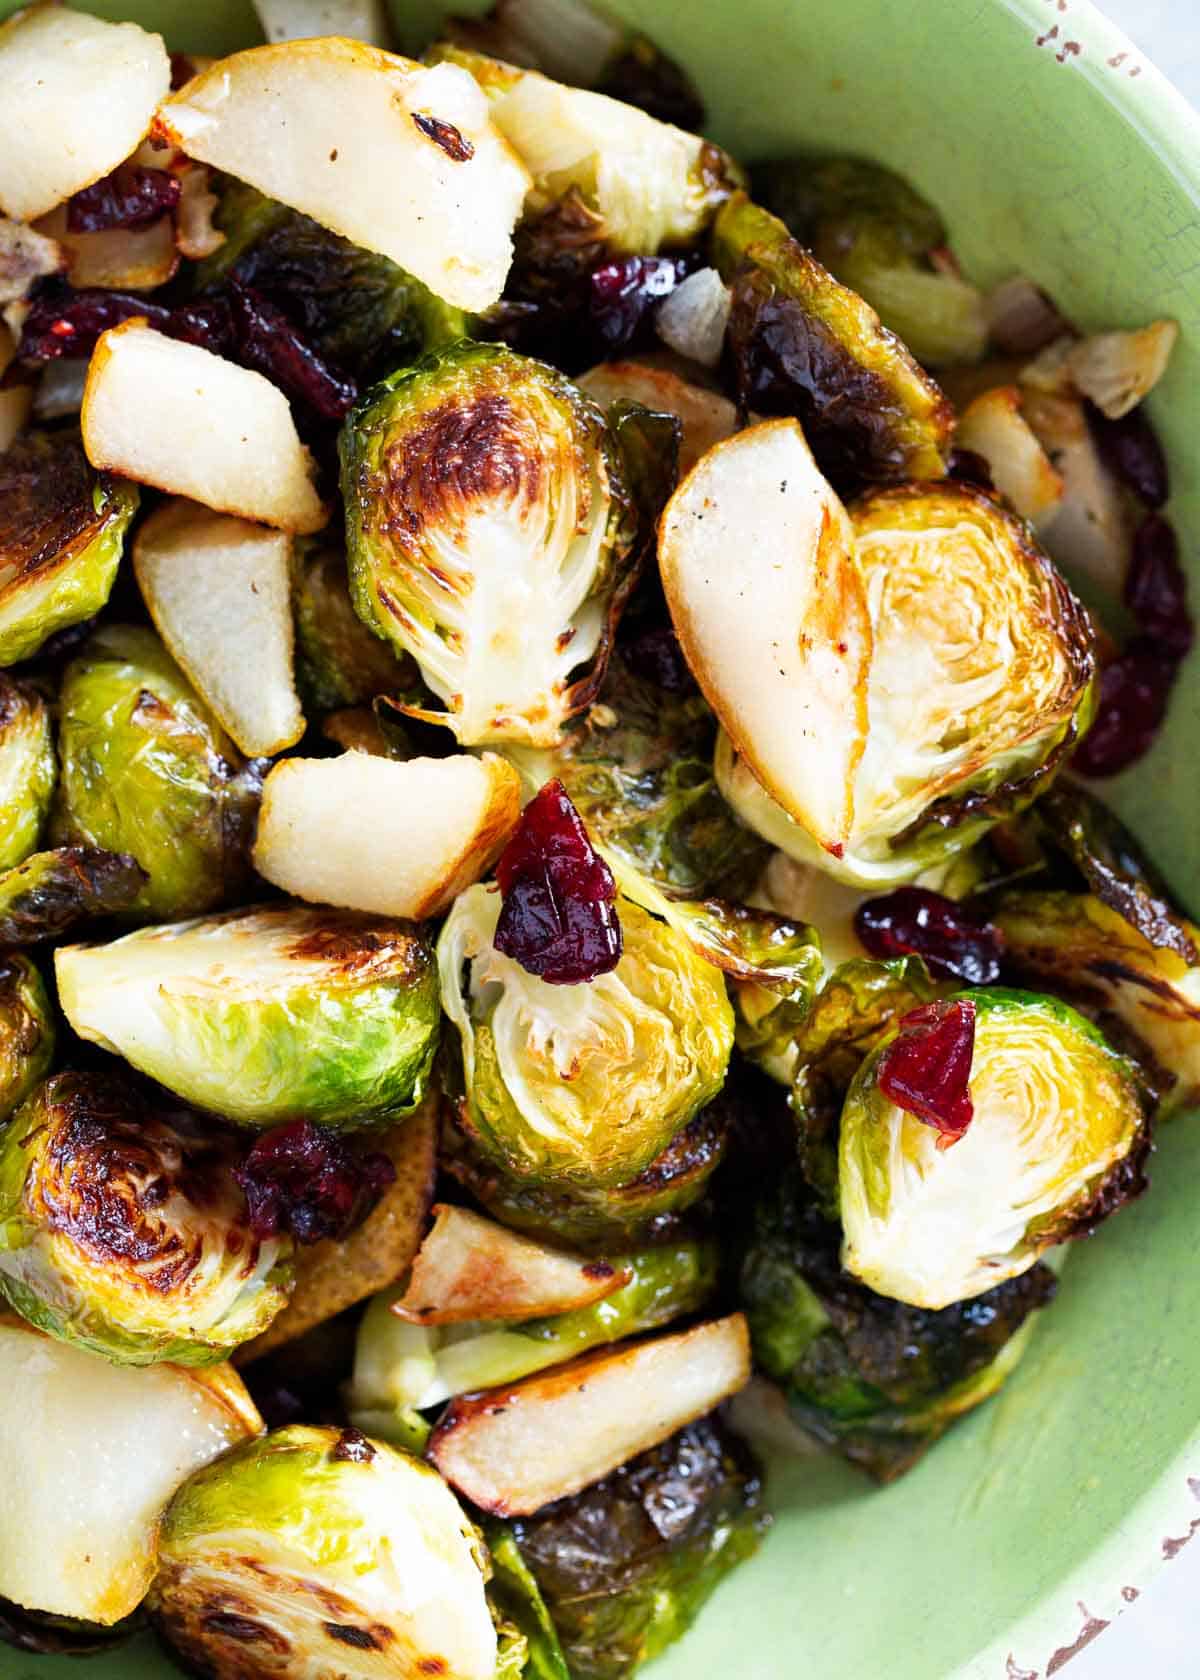 Roasted brussel sprouts with cranberries in bowl.